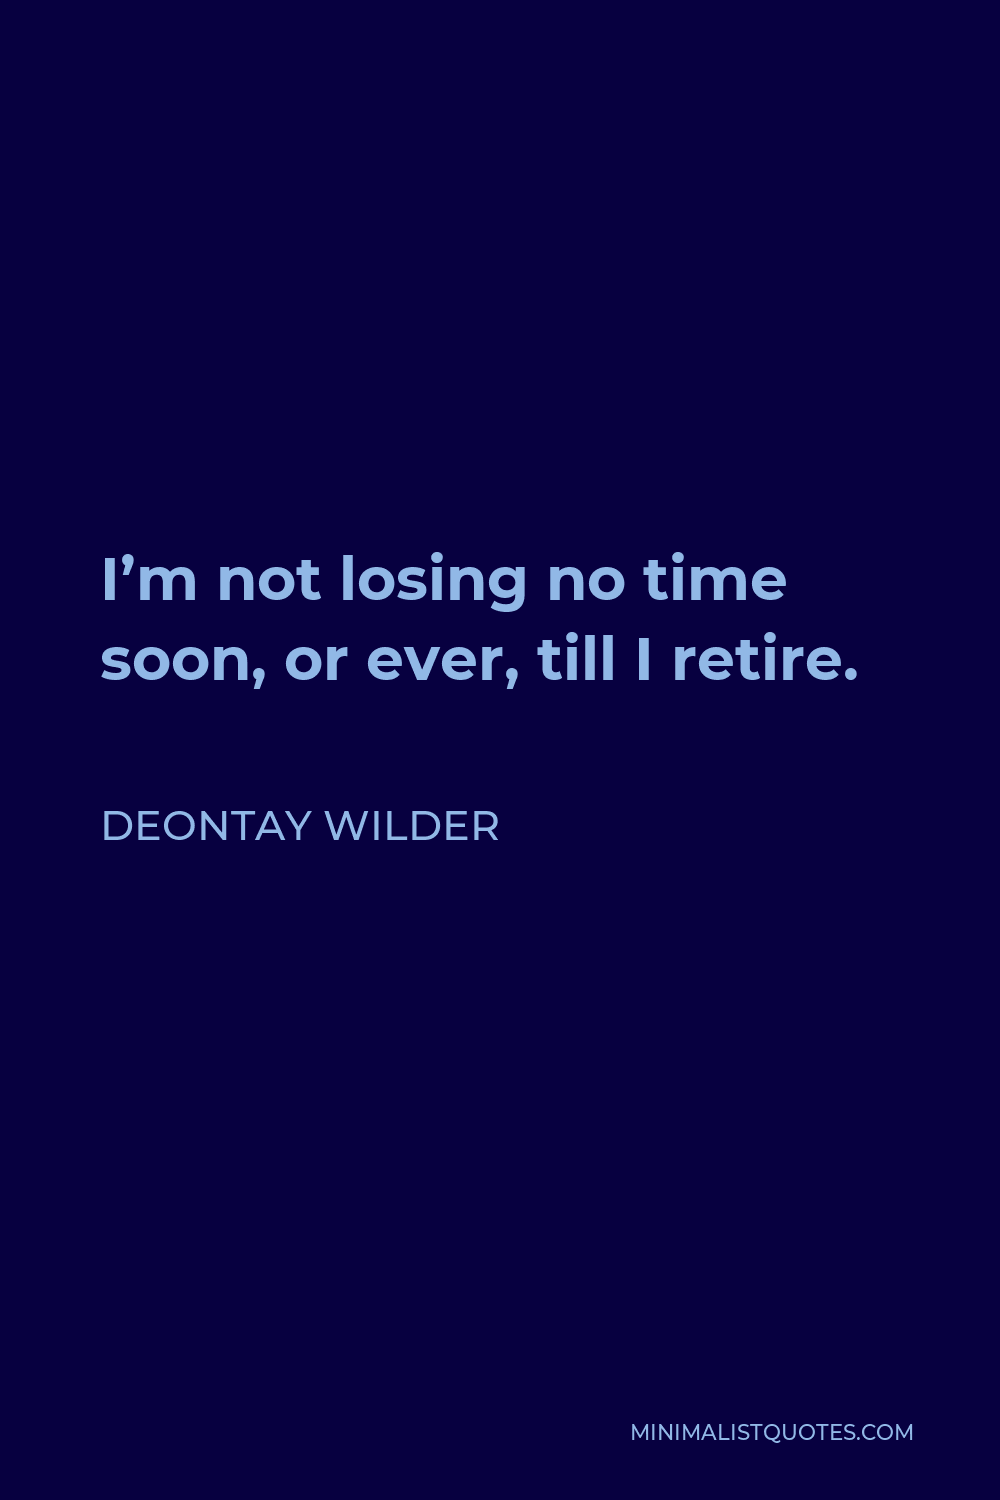 Deontay Wilder Quote - I’m not losing no time soon, or ever, till I retire.